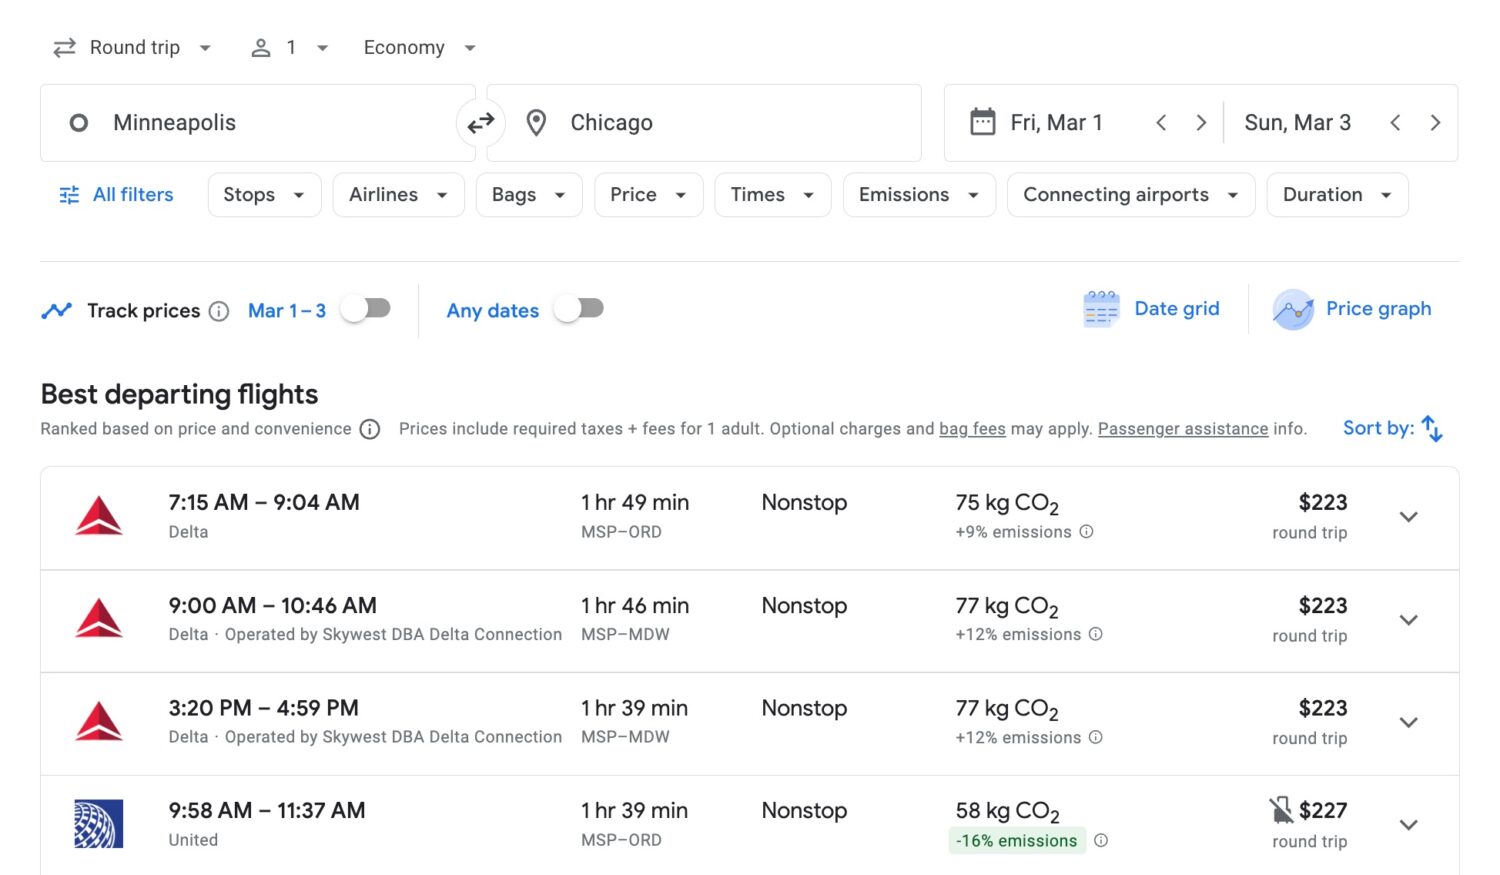 Google Flights search for flights from Minneapolis (MSP) to Chicago (ORD)